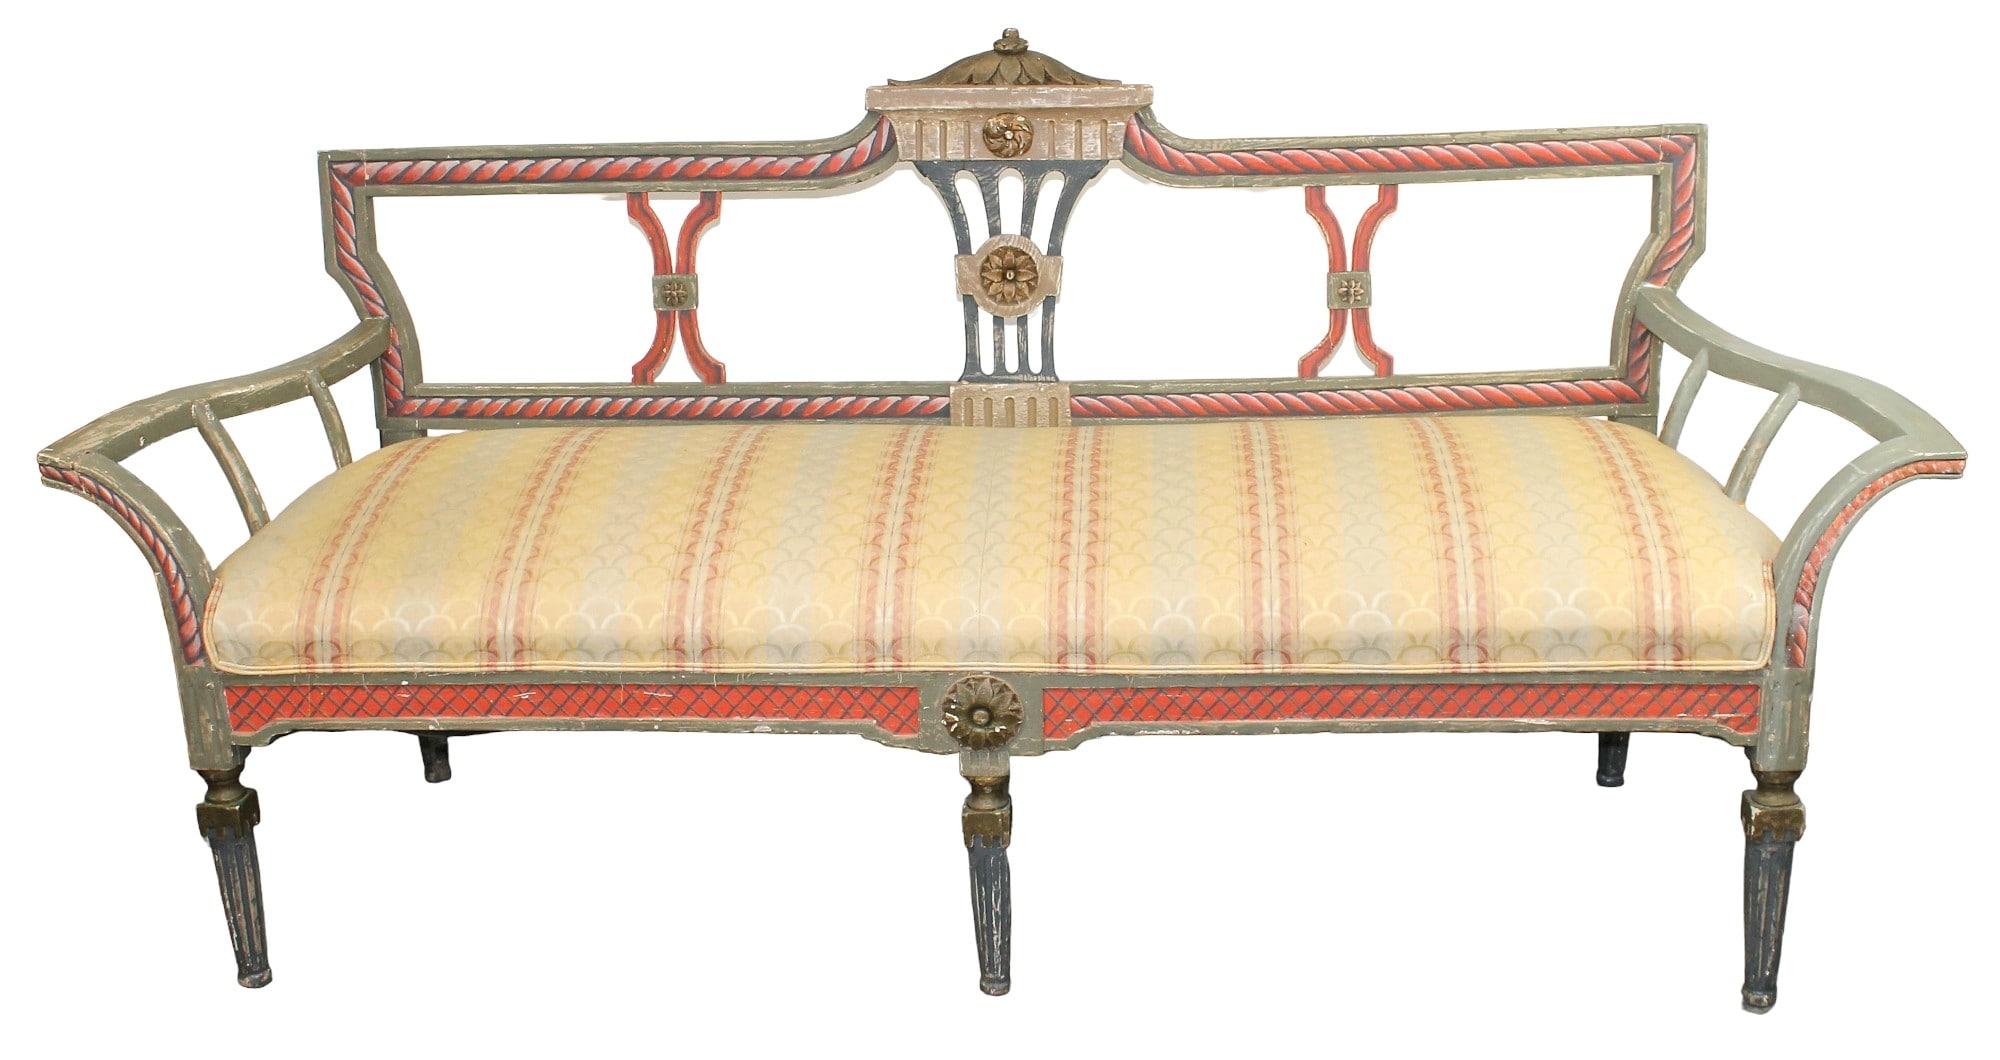 Antique Swedish carved polychrome bench